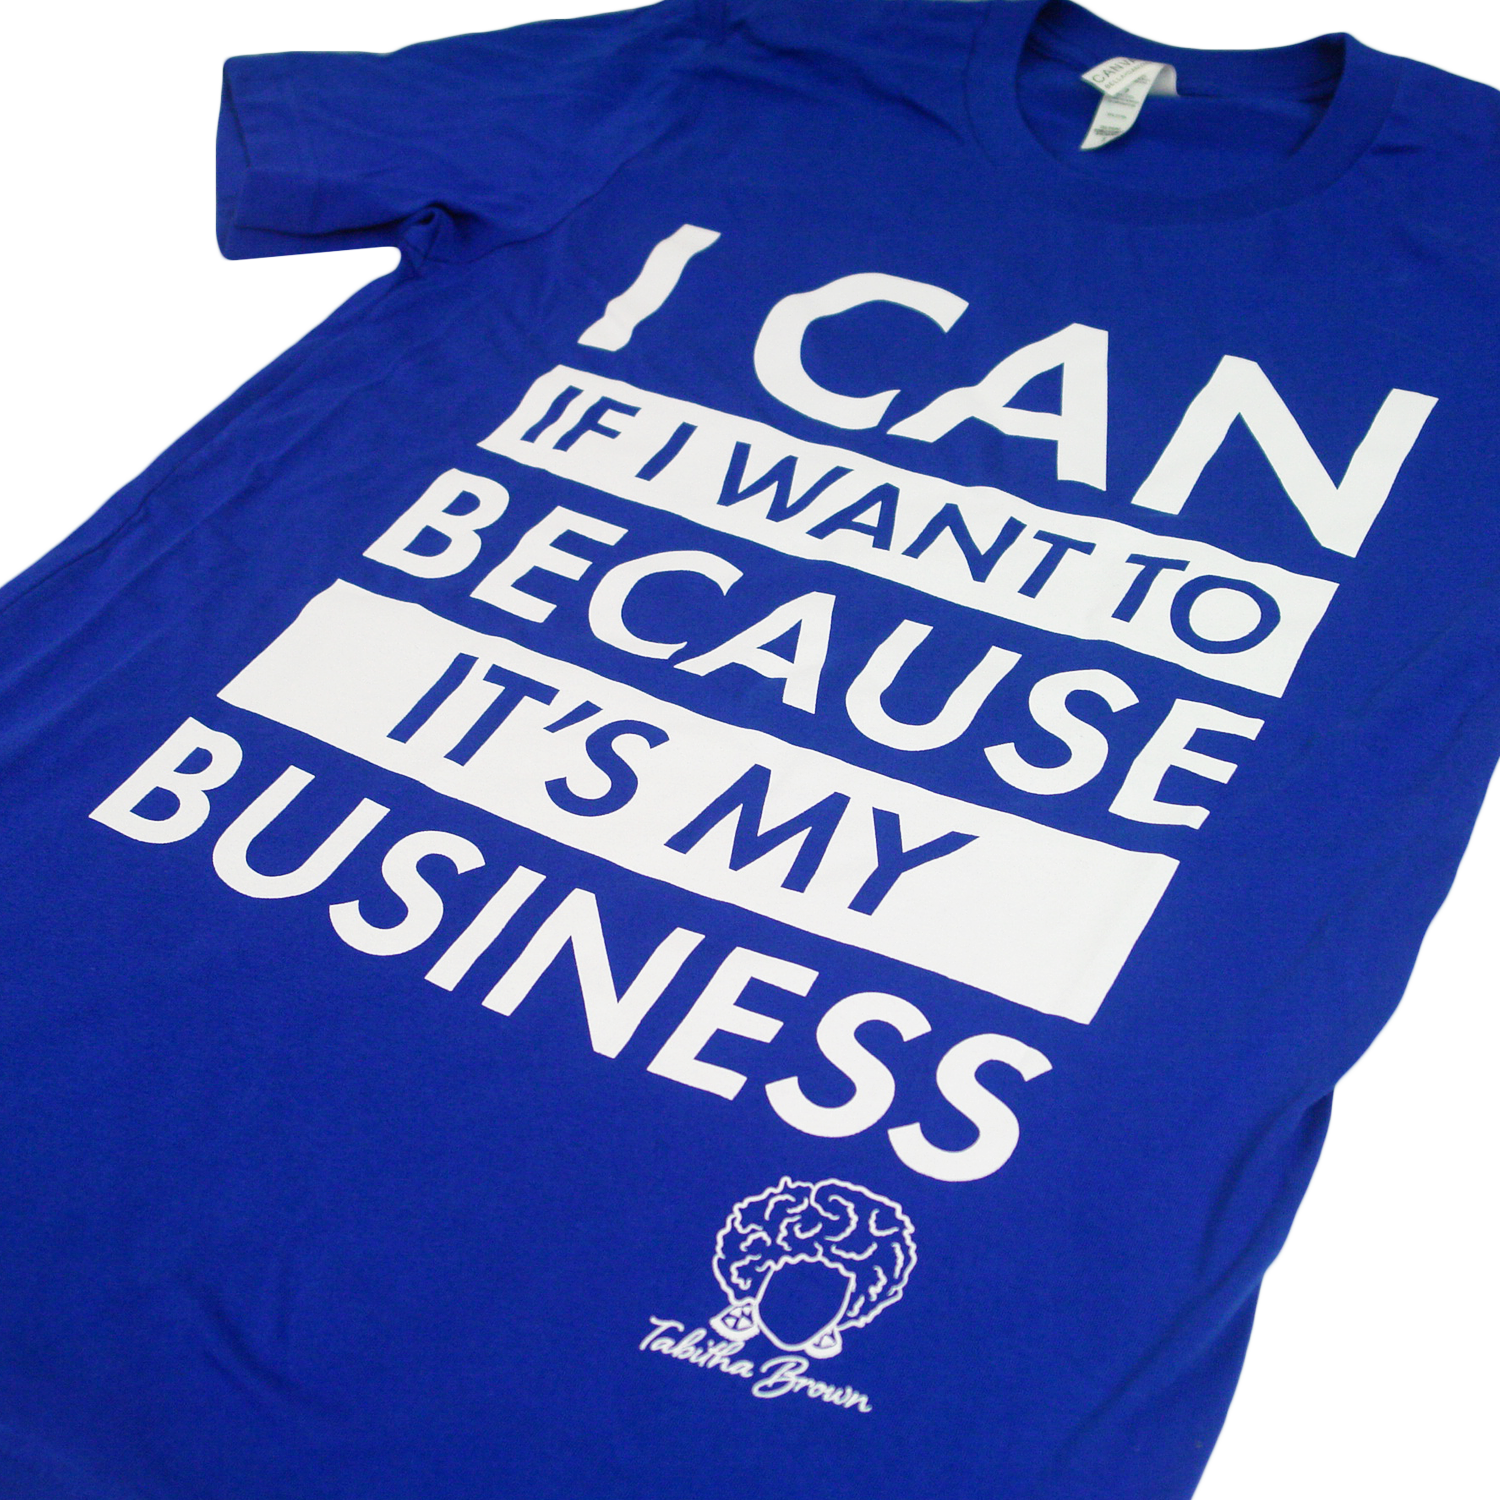 close up angled photo of image of royal blue tee shirt on clear background. full chest print in white that is stacked and reads "i can if i want to because it's my business" with tabitha brown's logo of her head with earrings and her name in cursive below on the right.